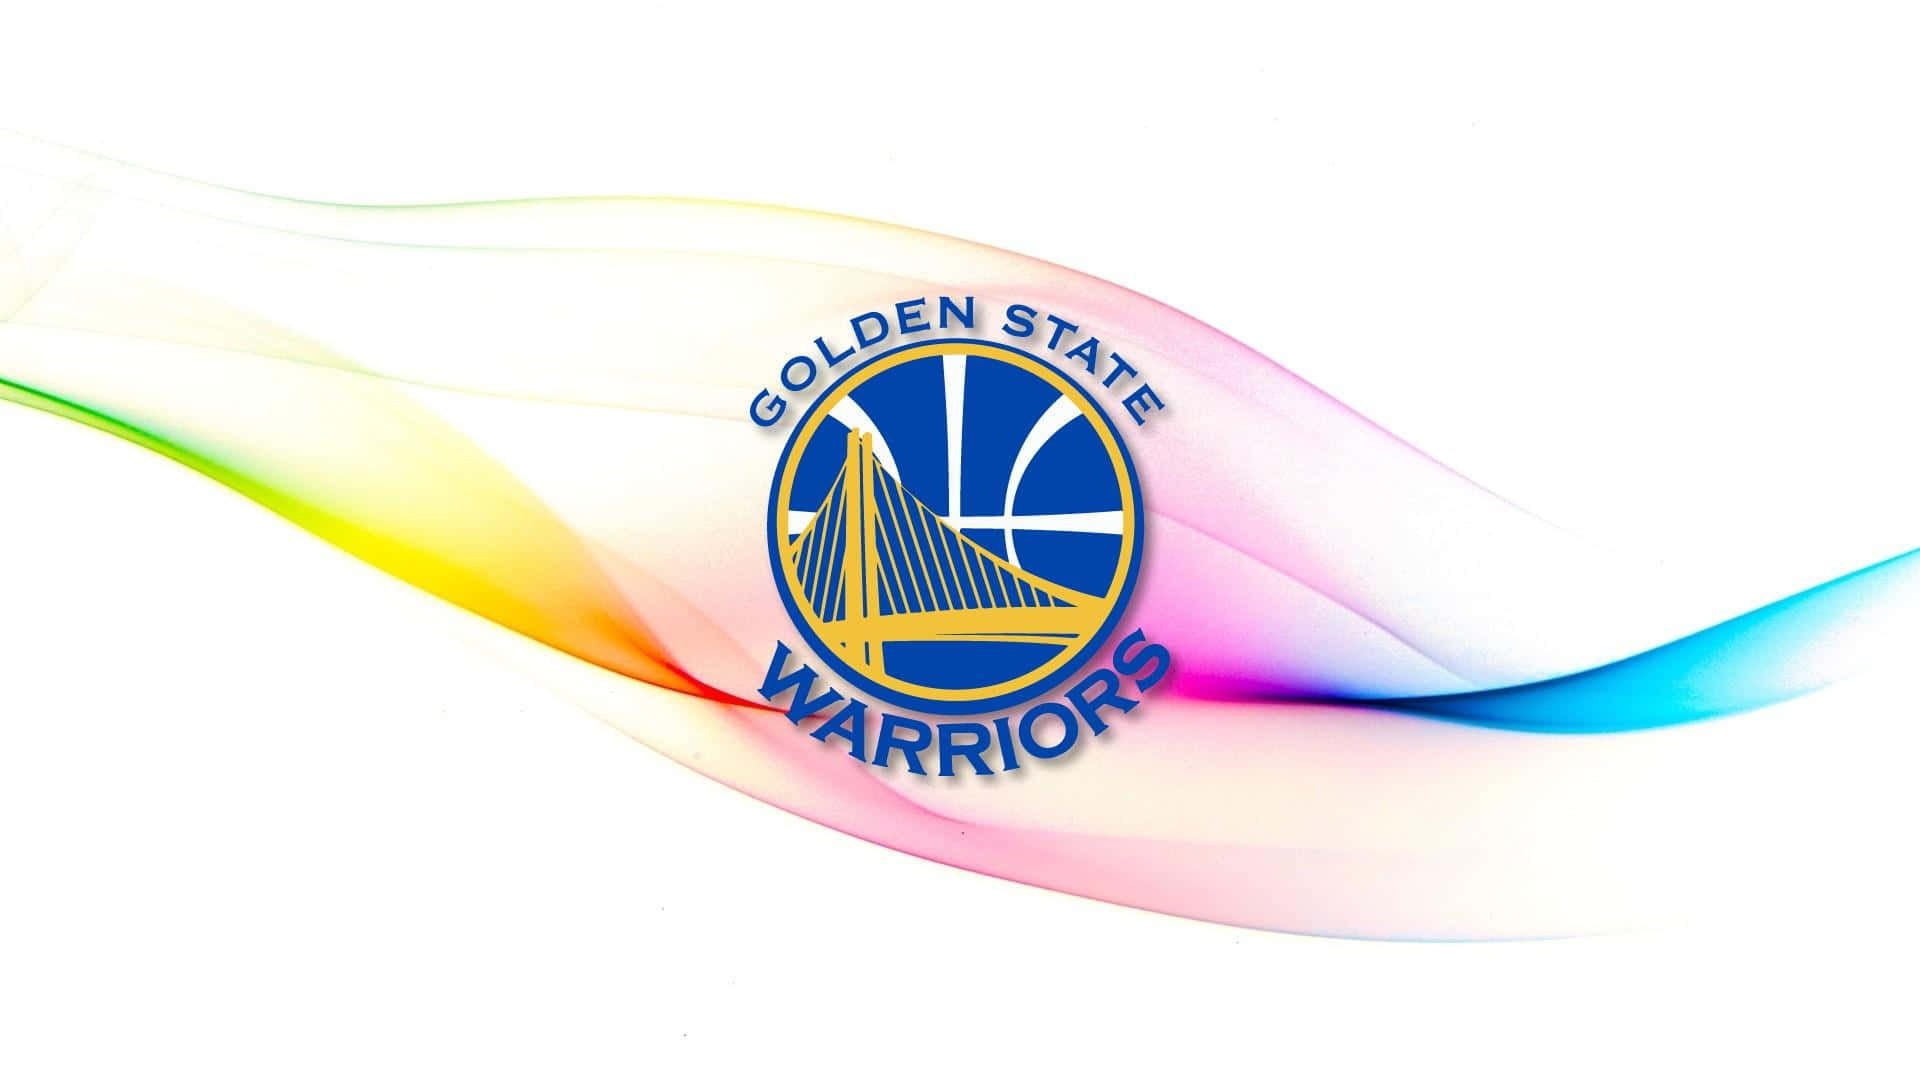 Golden State Warriors Logowith Colorful Smoke Effect Wallpaper